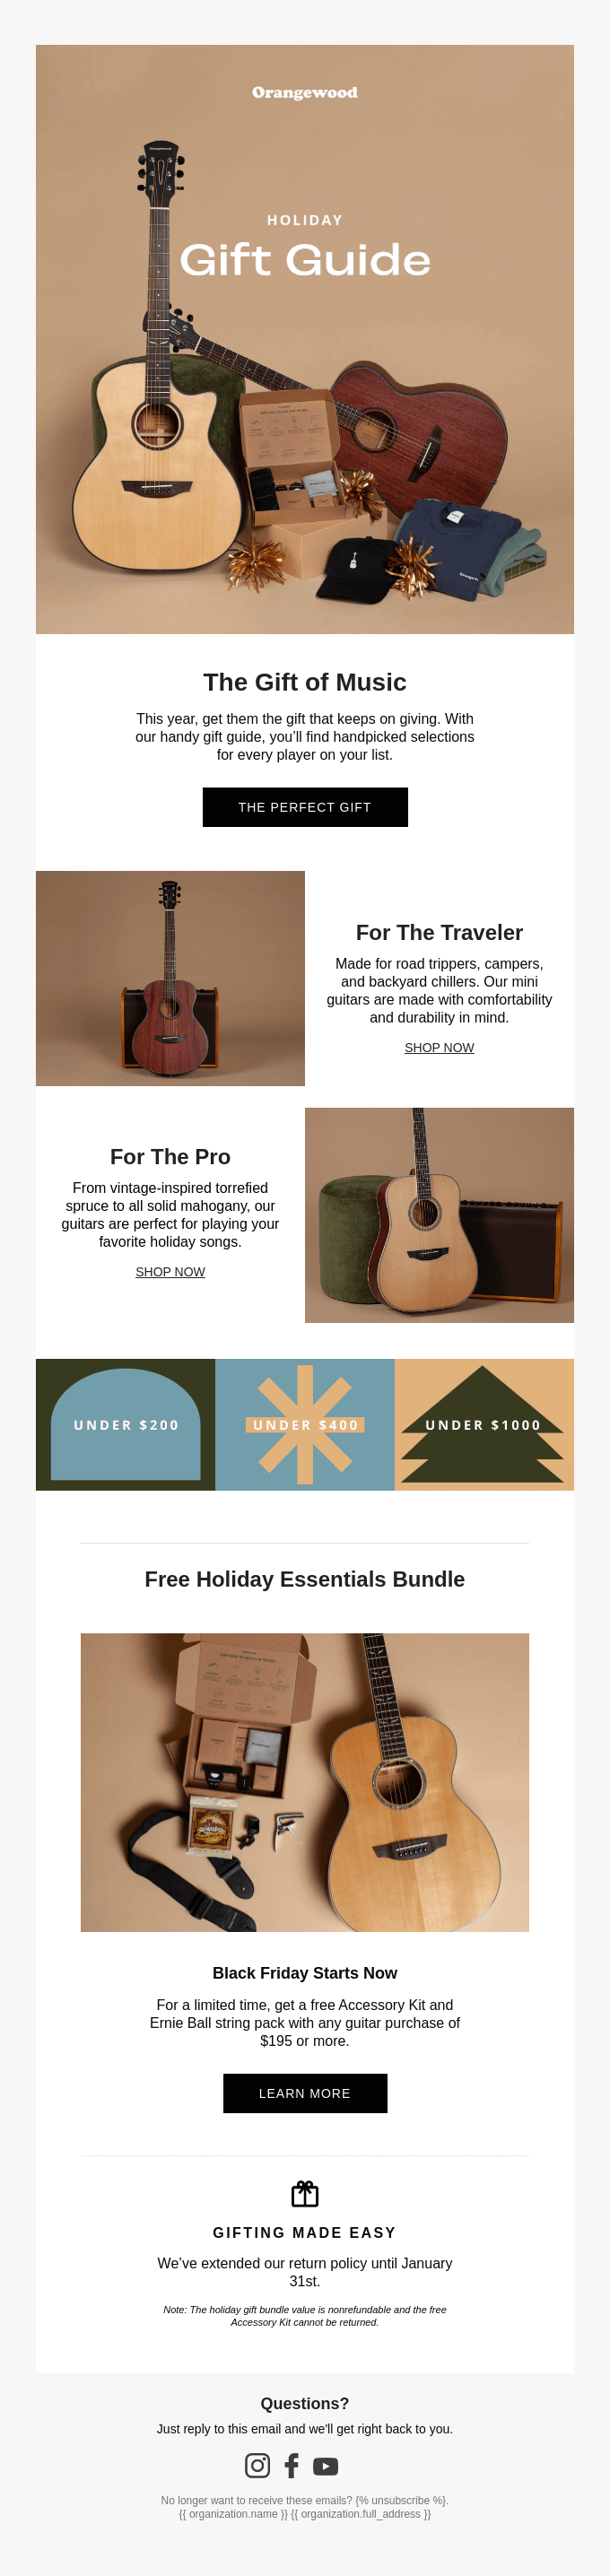 Our helpful holiday gift guide